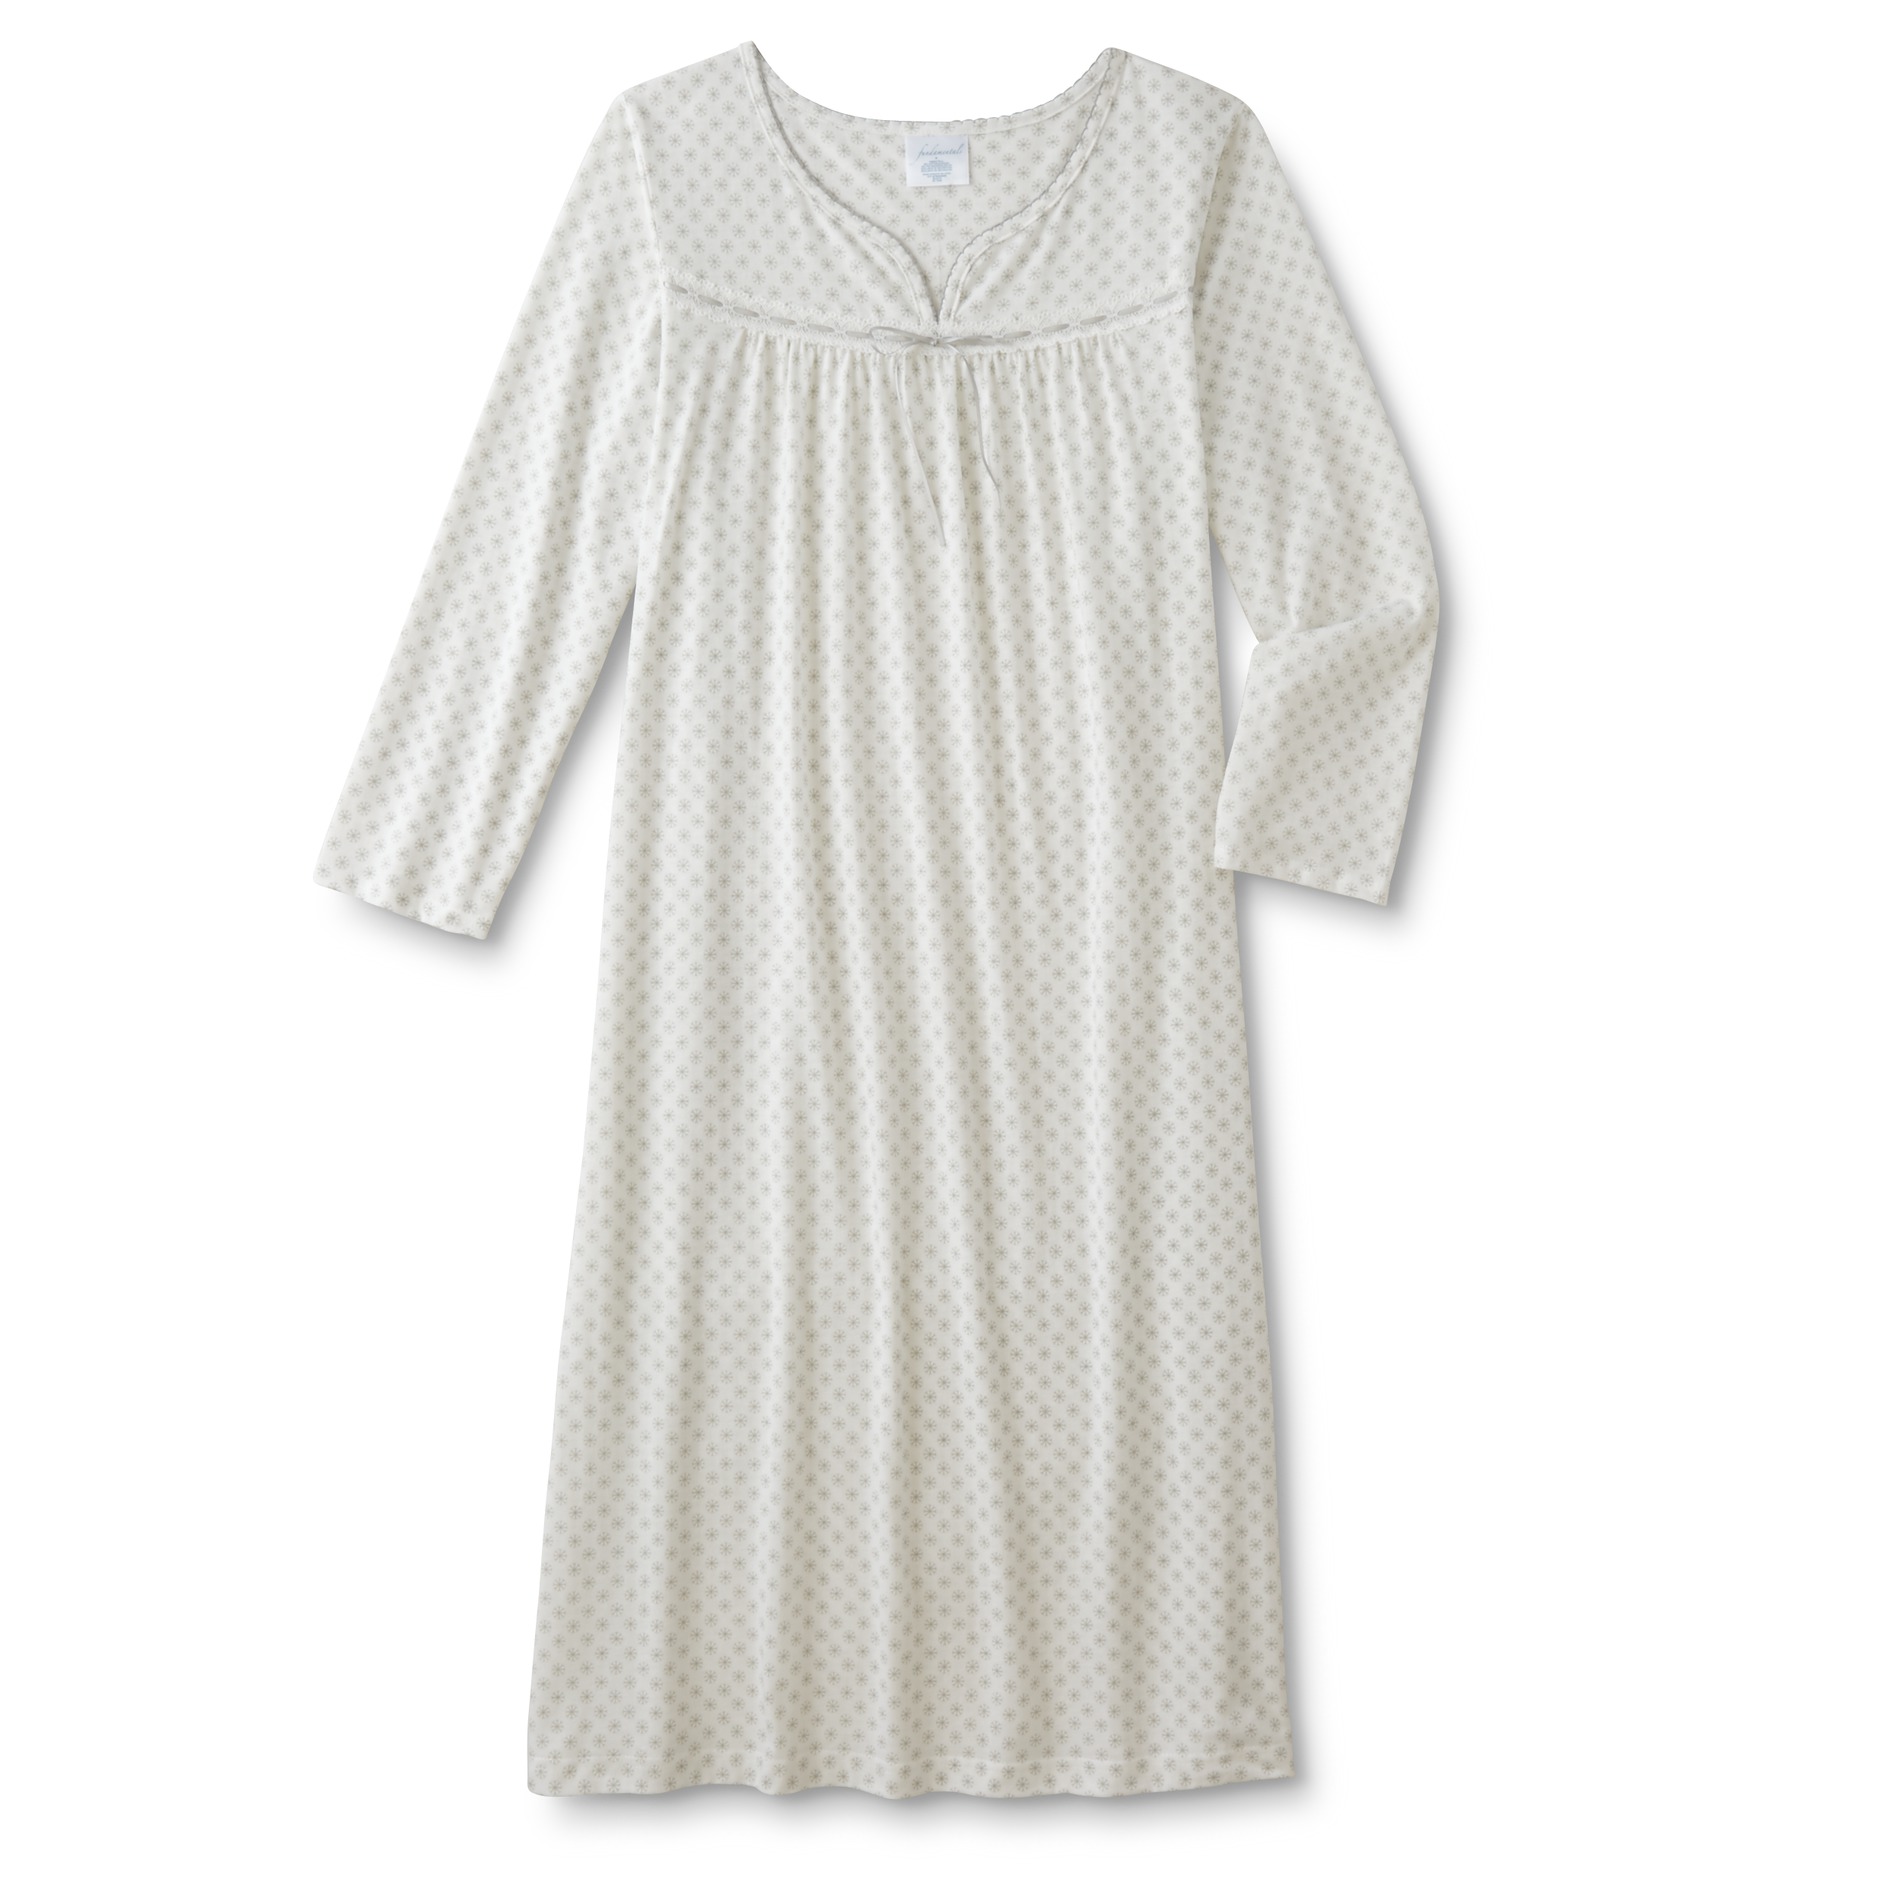 Fundamentals Women's Long-Sleeve Nightgown - Snowflakes